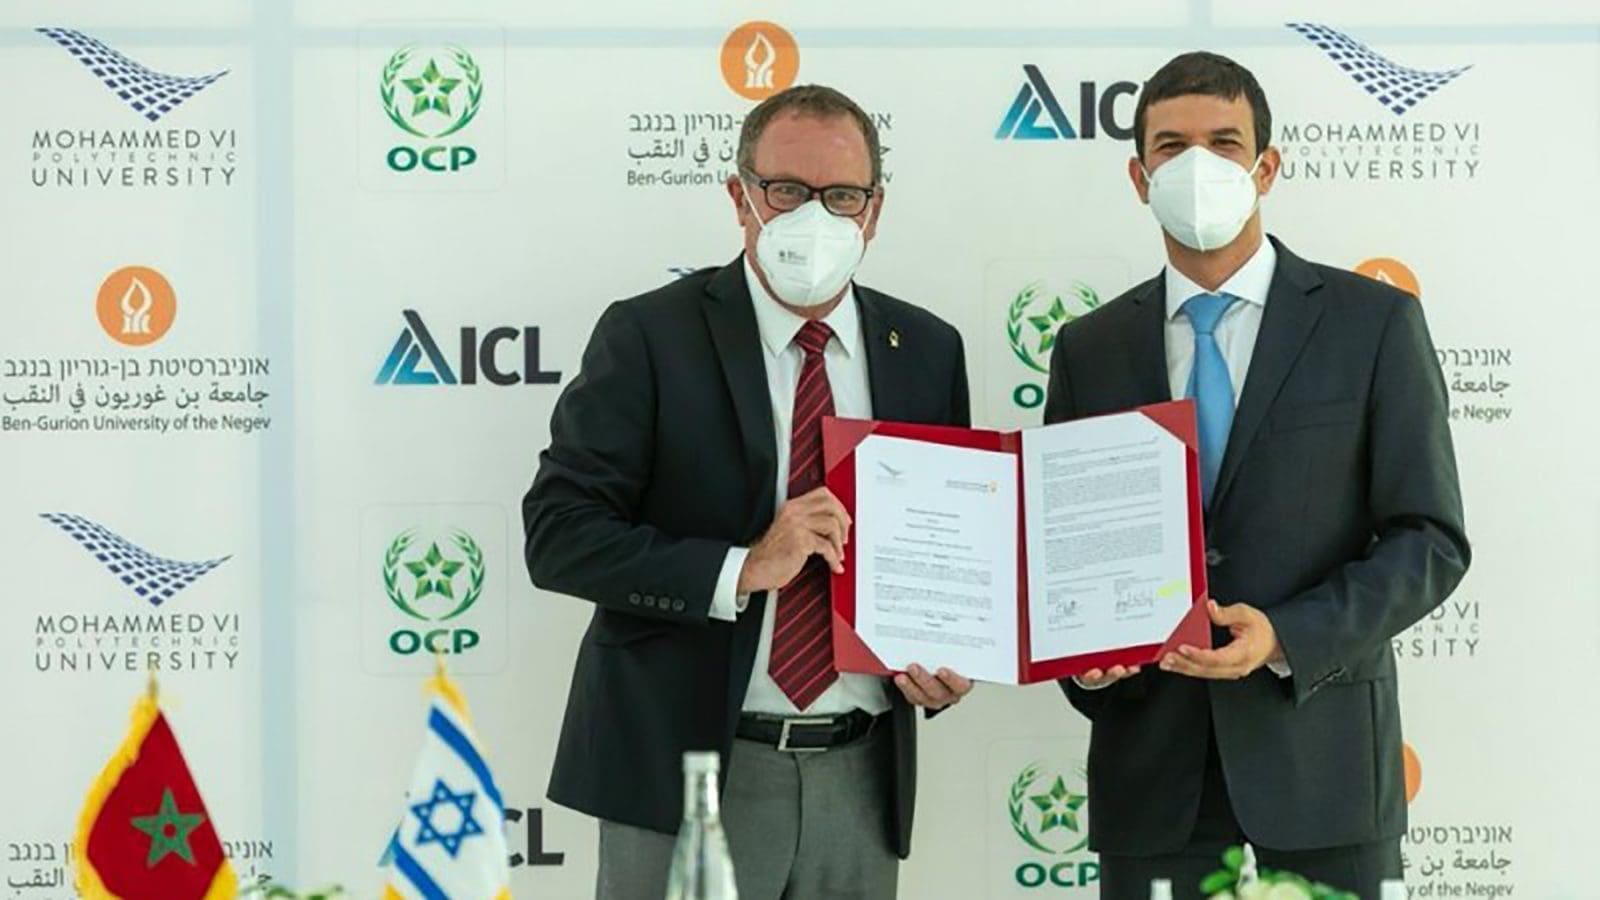 Fertilizer producers OCP, ICL sign agreement to promote sustainability research in Morocco